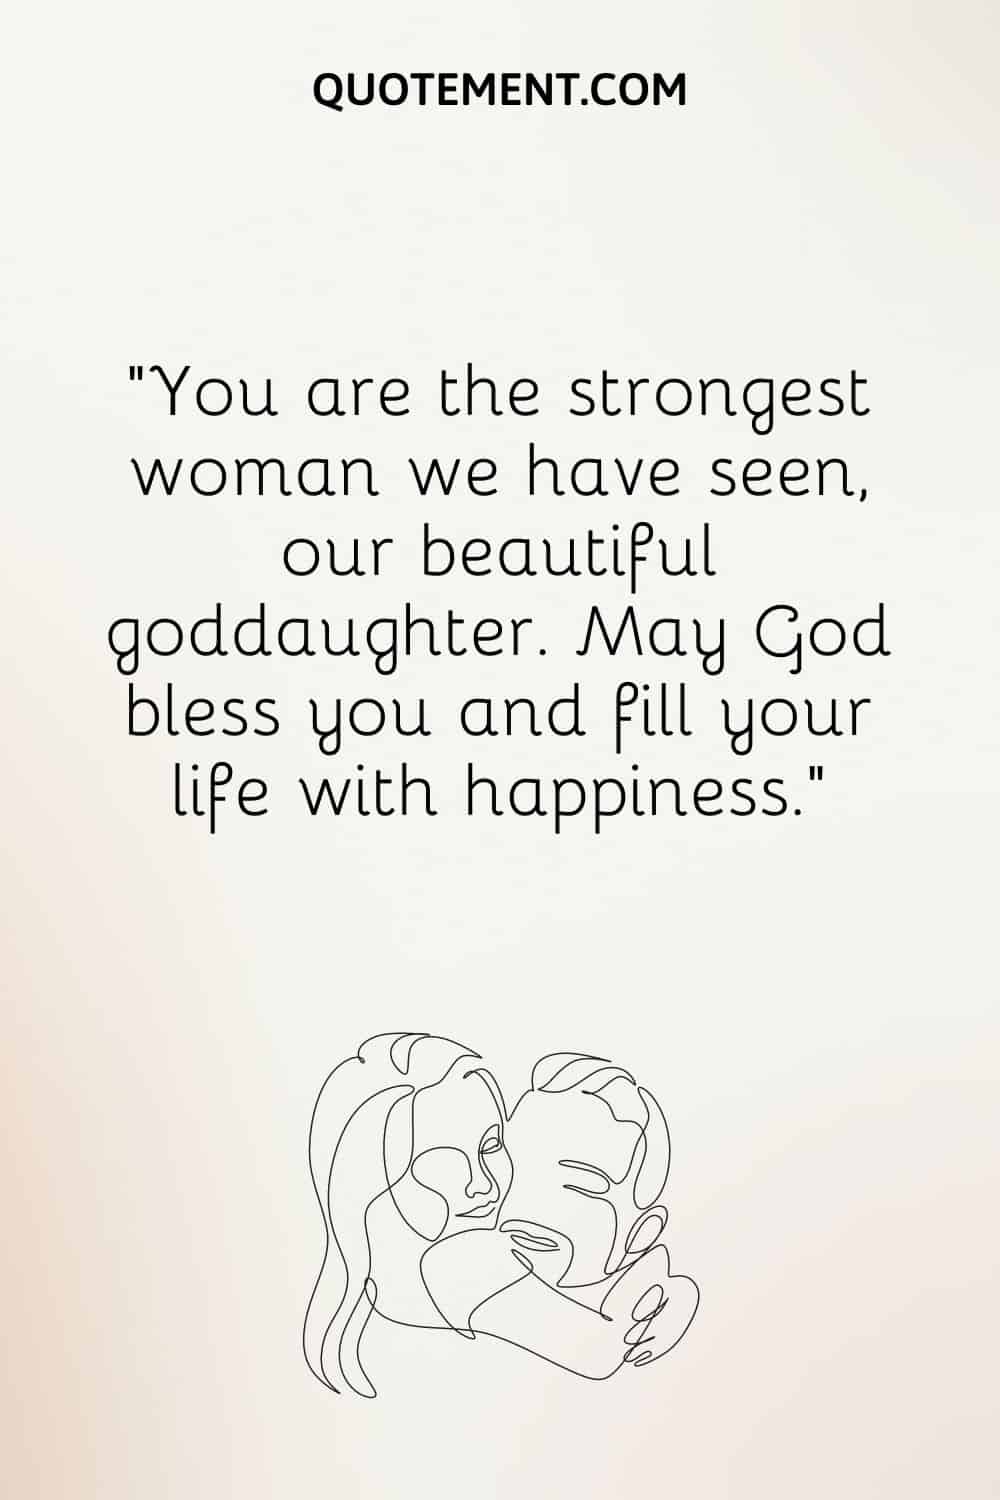 “You are the strongest woman we have seen, our beautiful goddaughter. May God bless you and fill your life with happiness.”